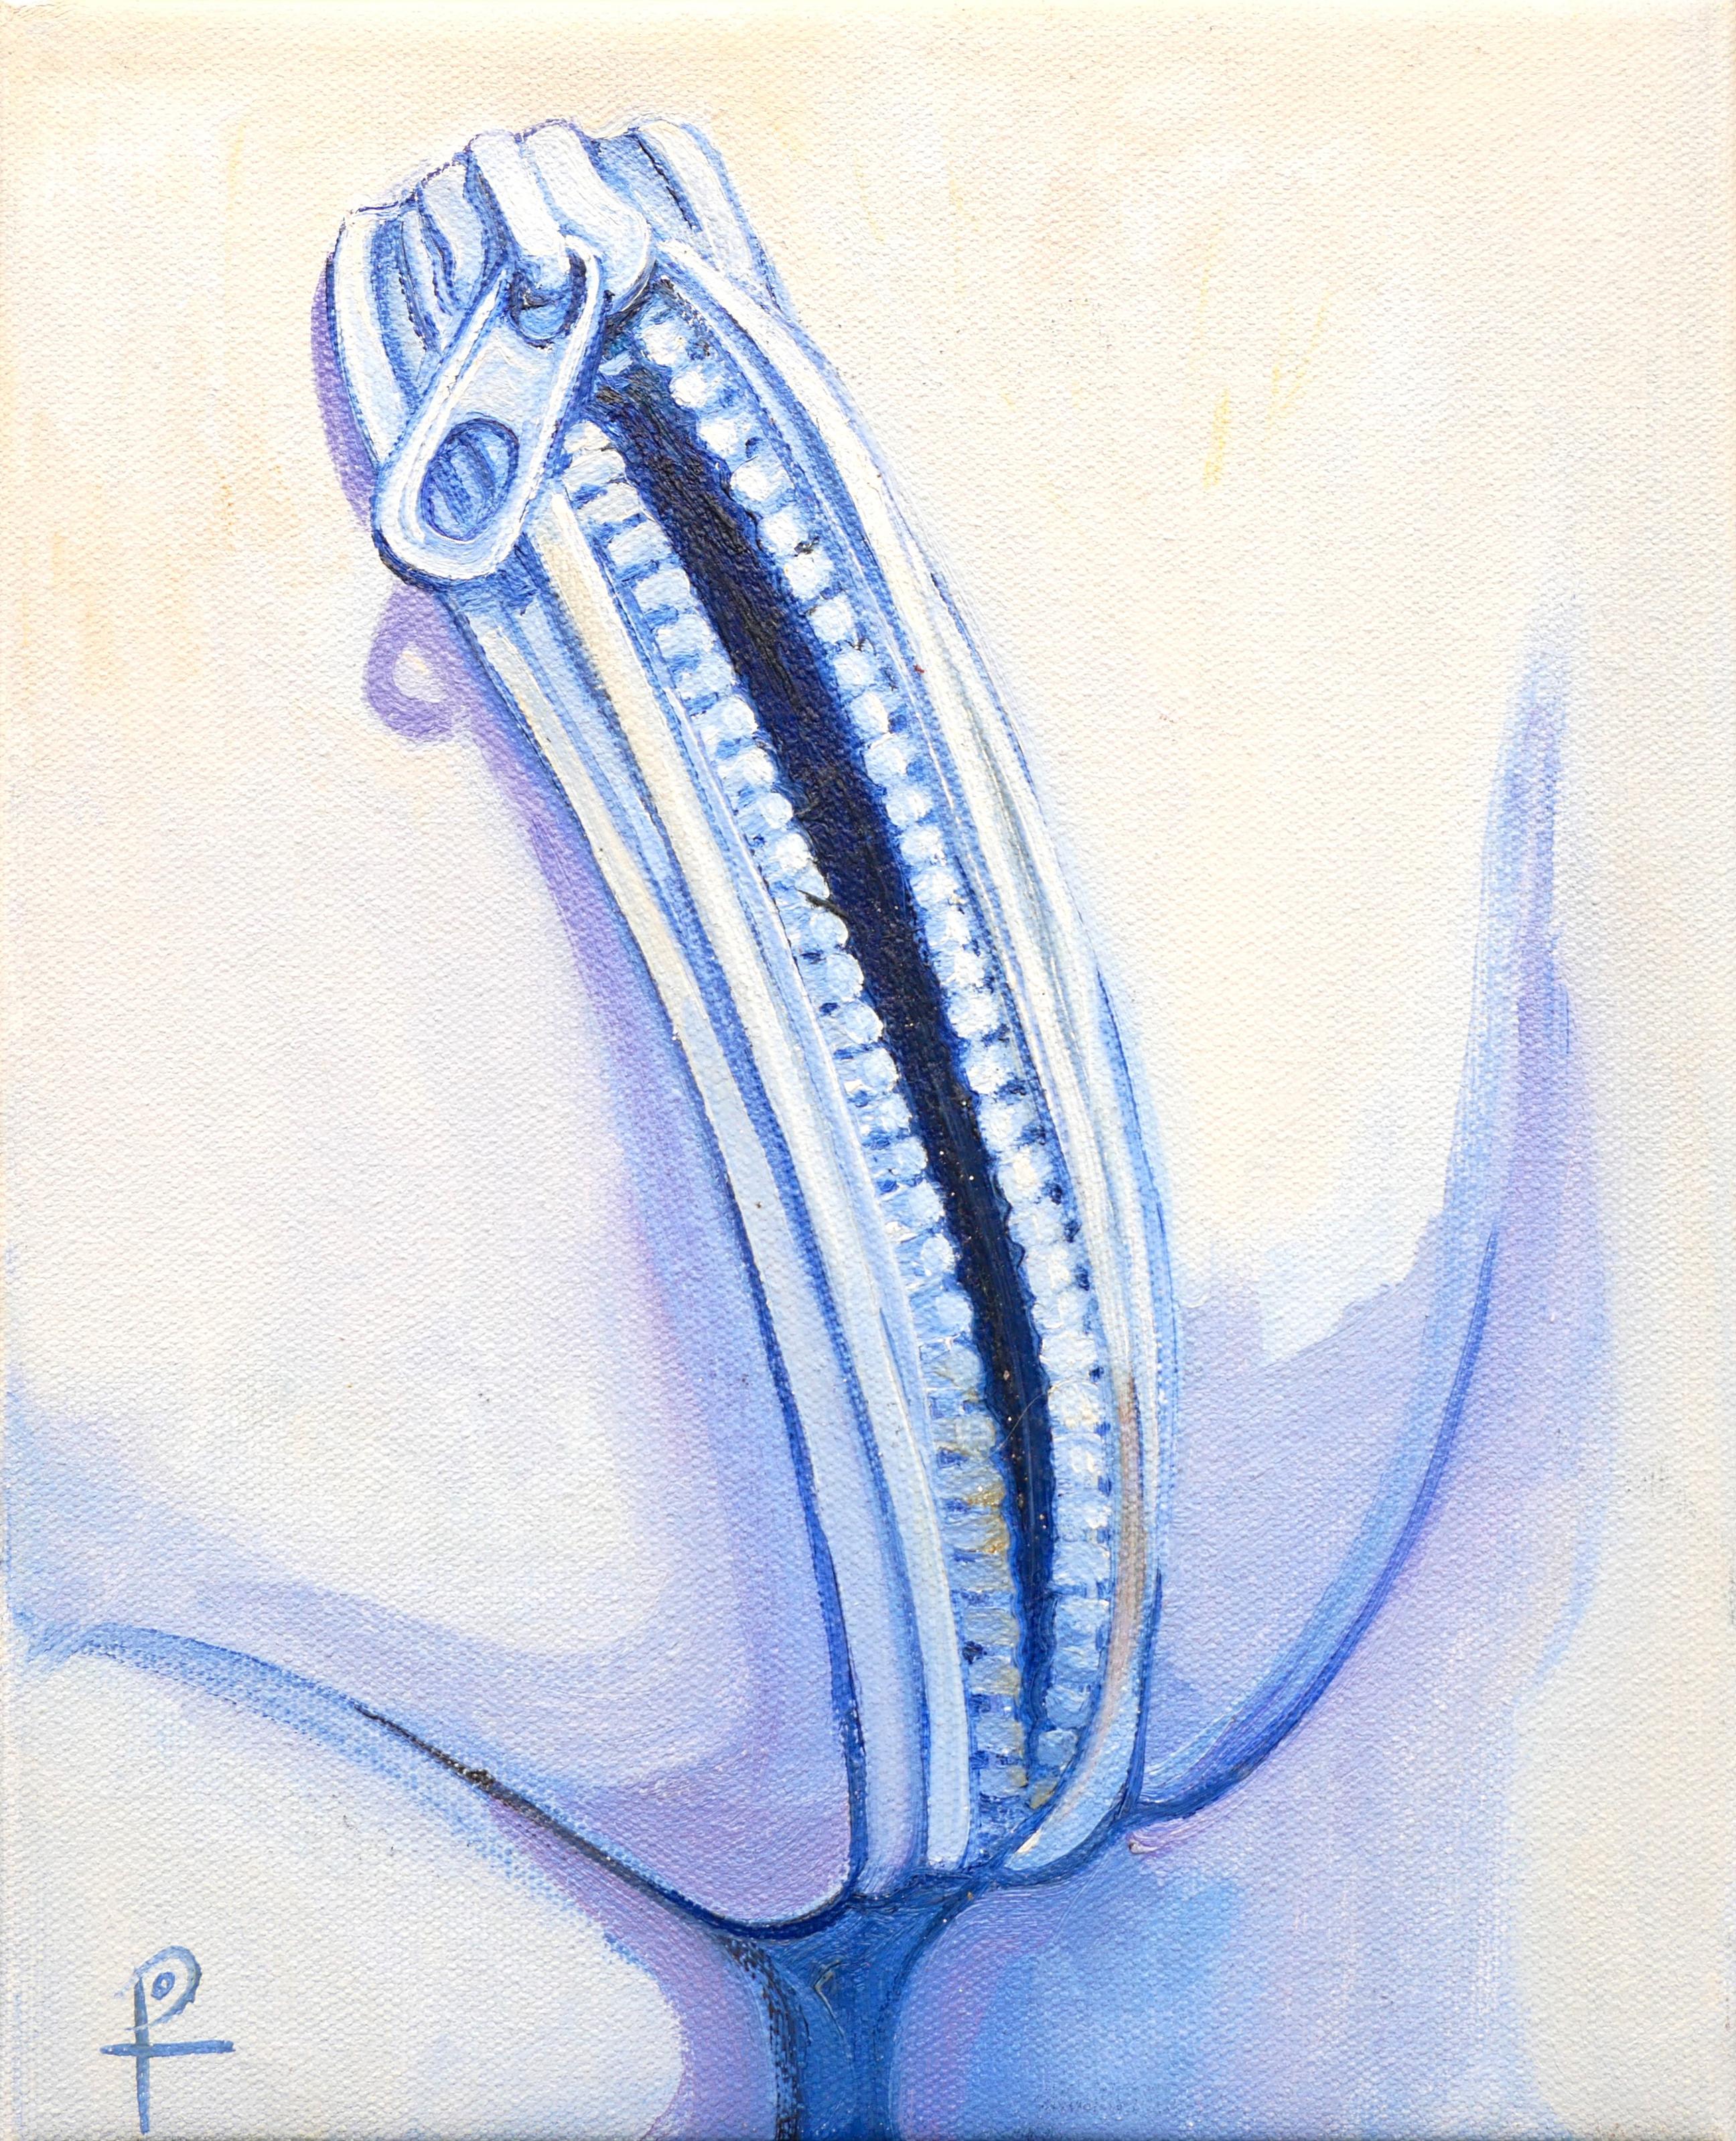 Pastel blue-toned surrealist painting done by artist Henry David Potwin. This work features an enlarged unzipped zipper acting as a woman's genital parts. Signed at bottom left corner. Titled and dated on reverse. Currently unframed, but options are